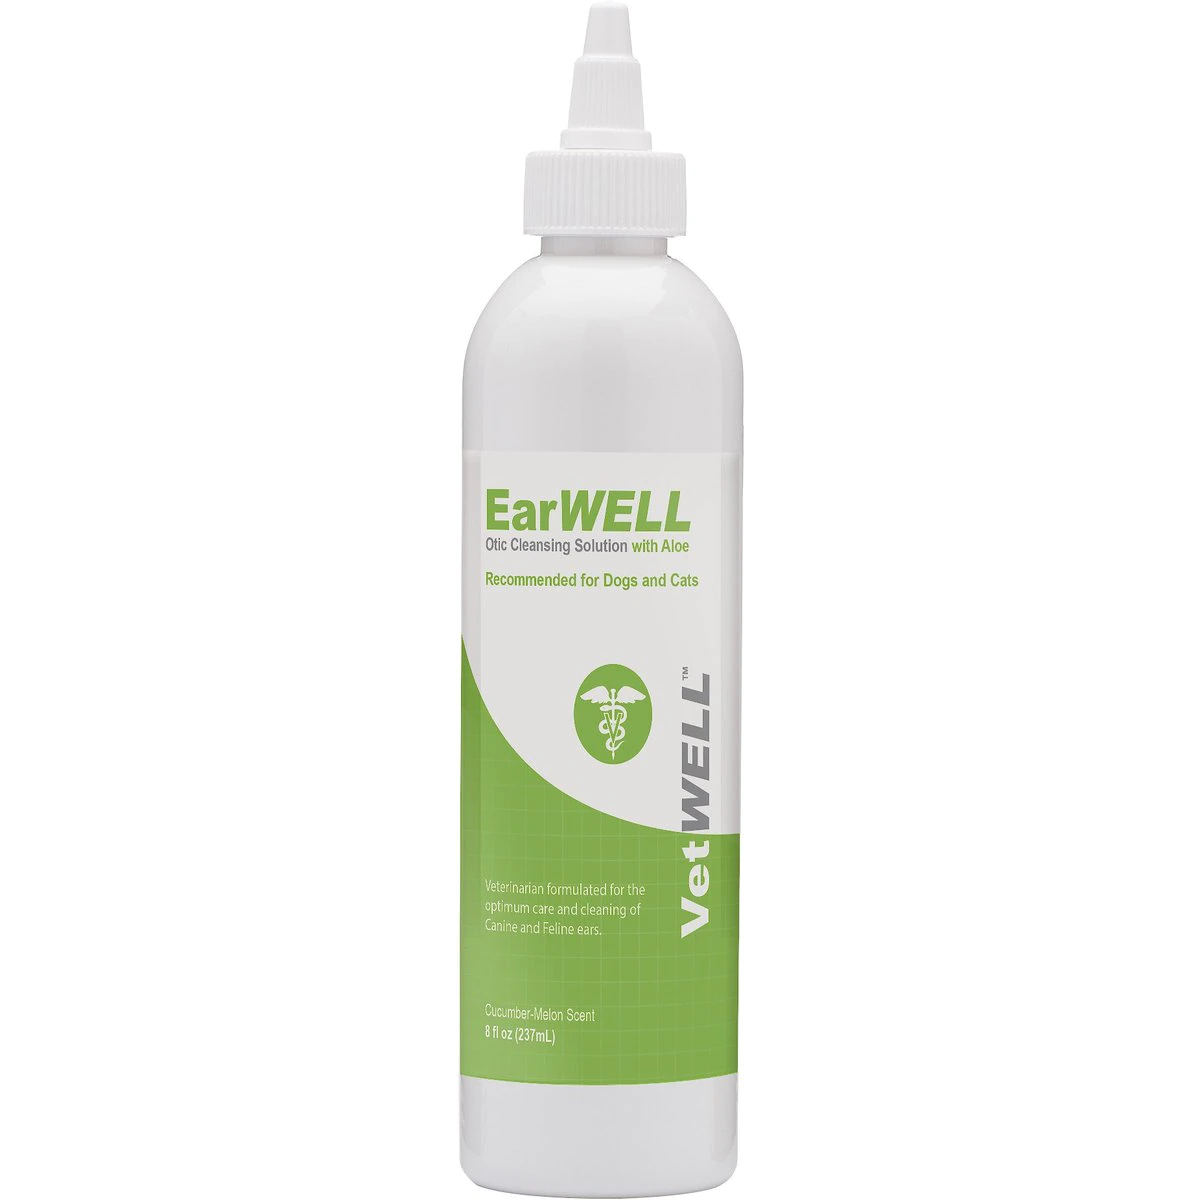 VetWELL EarWELL Otic Cleansing Solution with Aloe Cucumber Melon Scent Dog & Cat Ear Solution